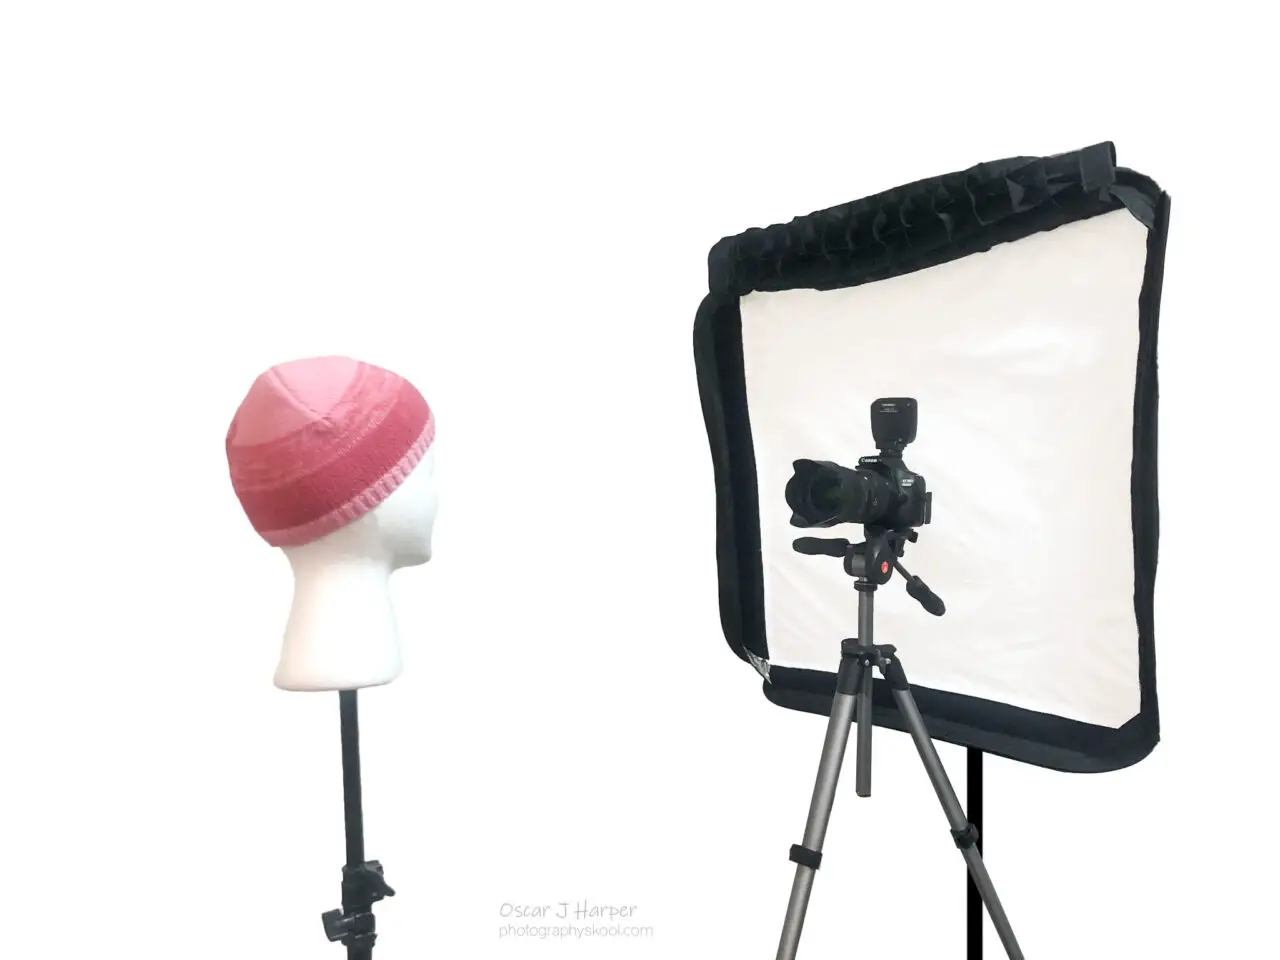 Polystyrene head on a stand, camera and radio trigger on a tripod in front of a large square softbox on a stand.